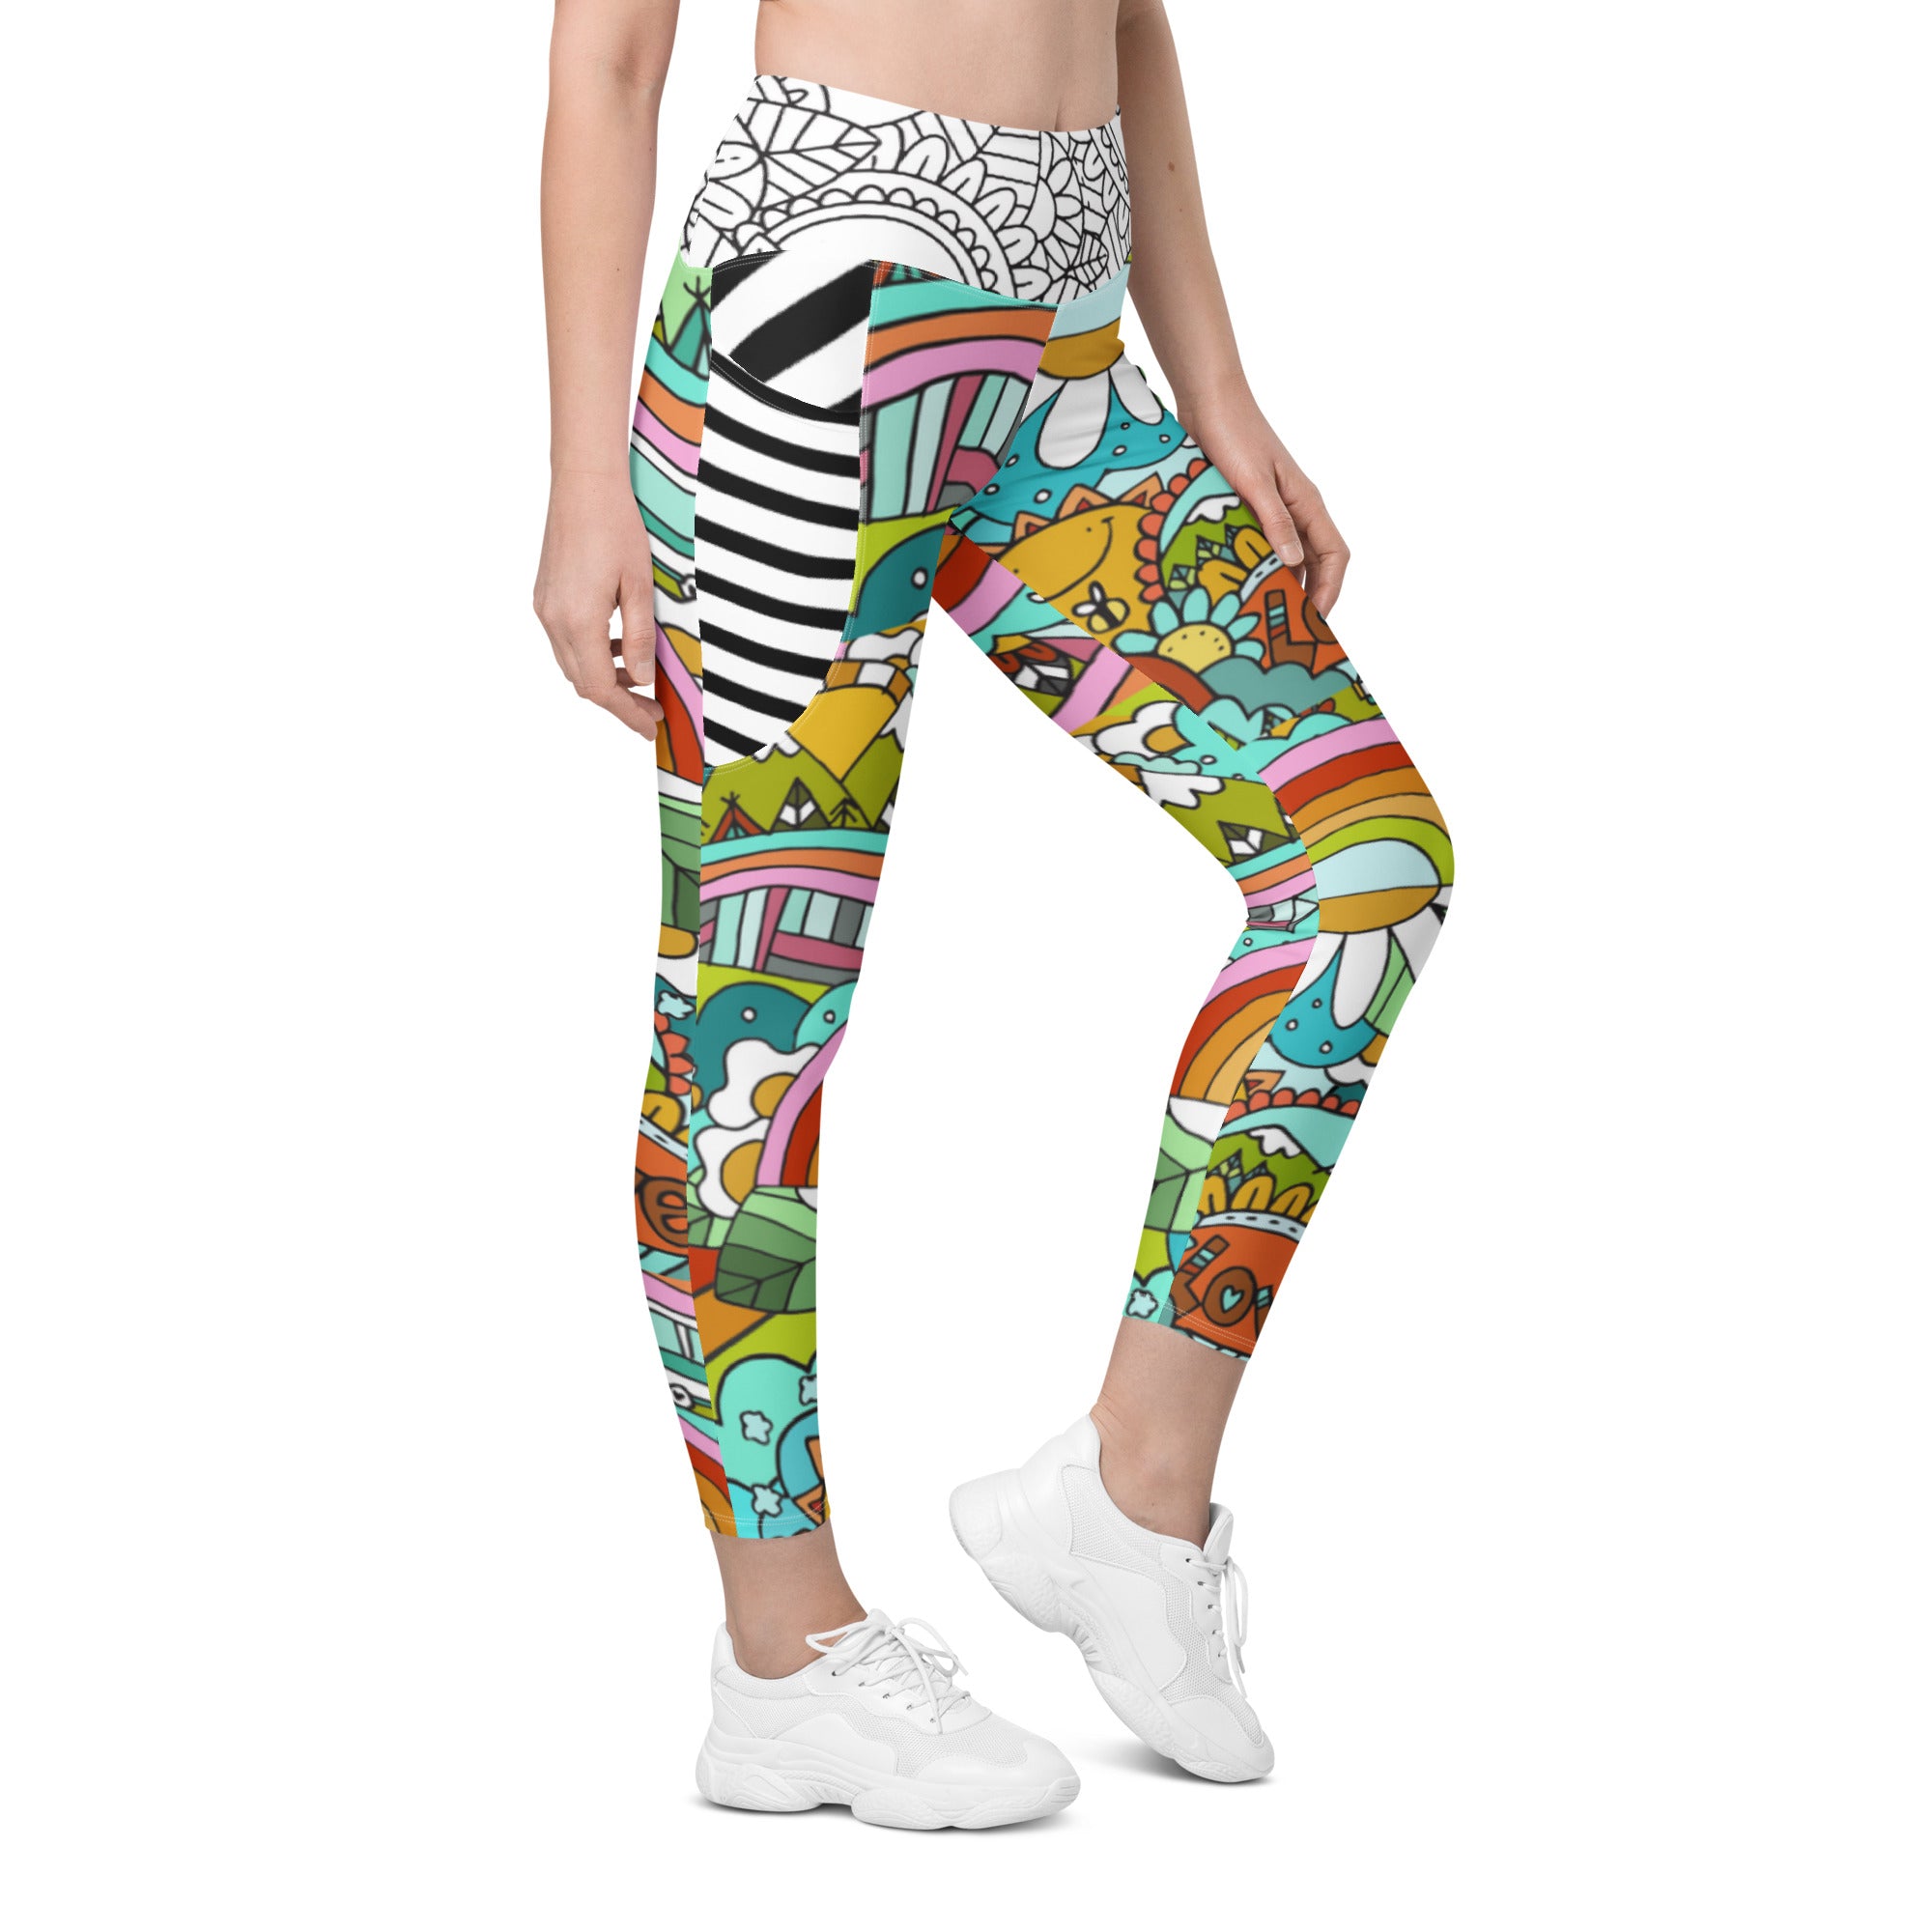 "Love Today" Leggings with pockets